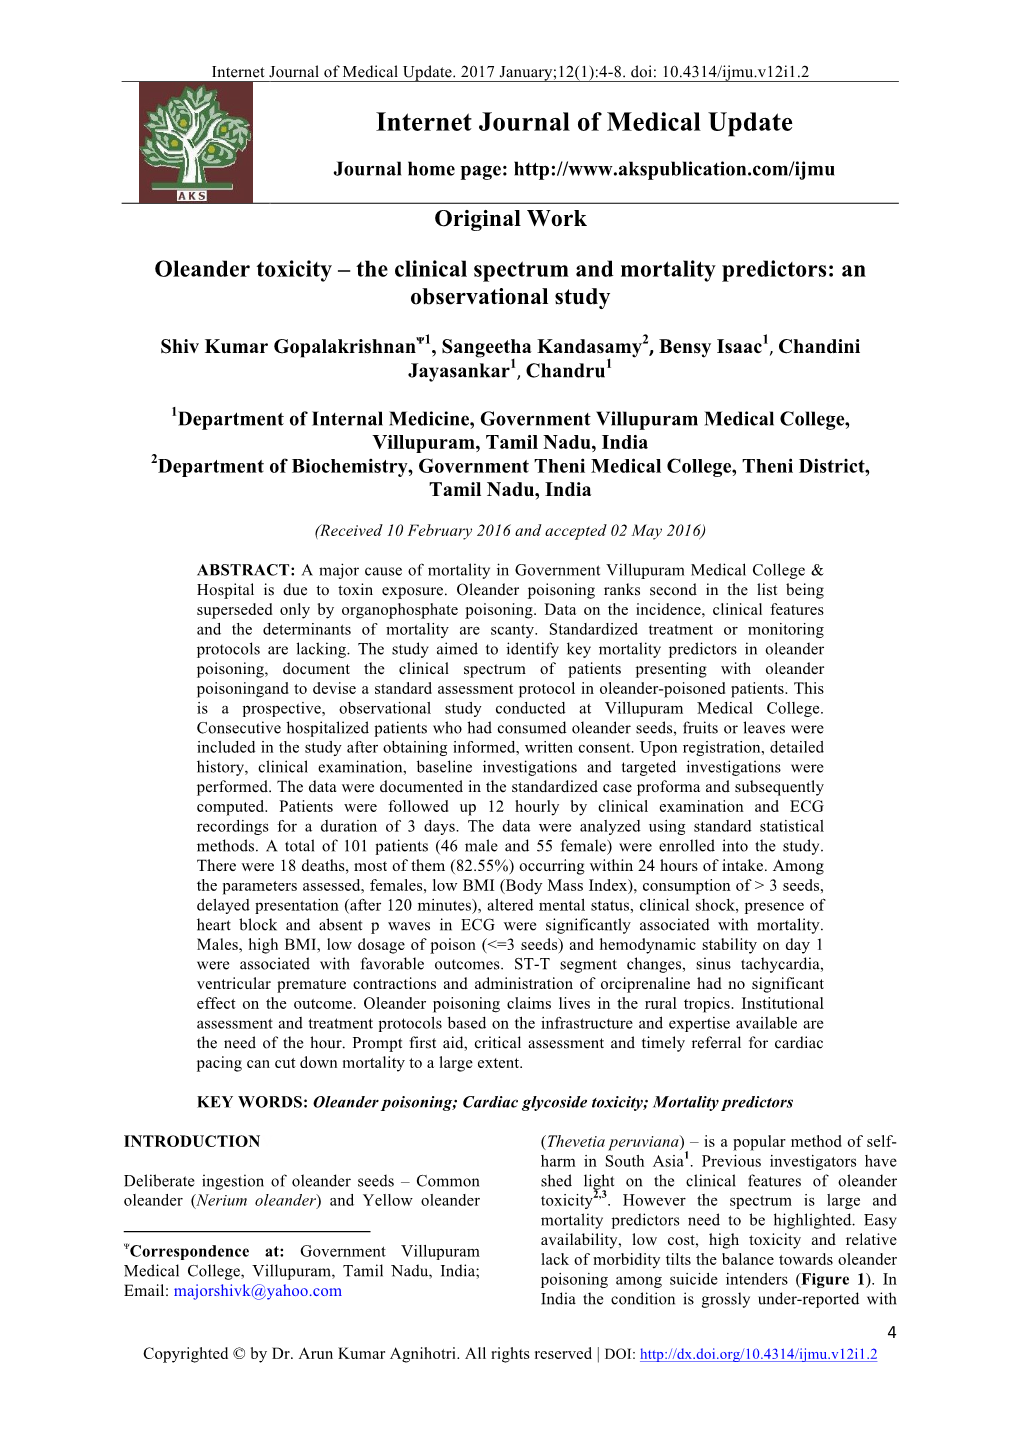 Oleander Toxicity – the Clinical Spectrum and Mortality Predictors: an Observational Study